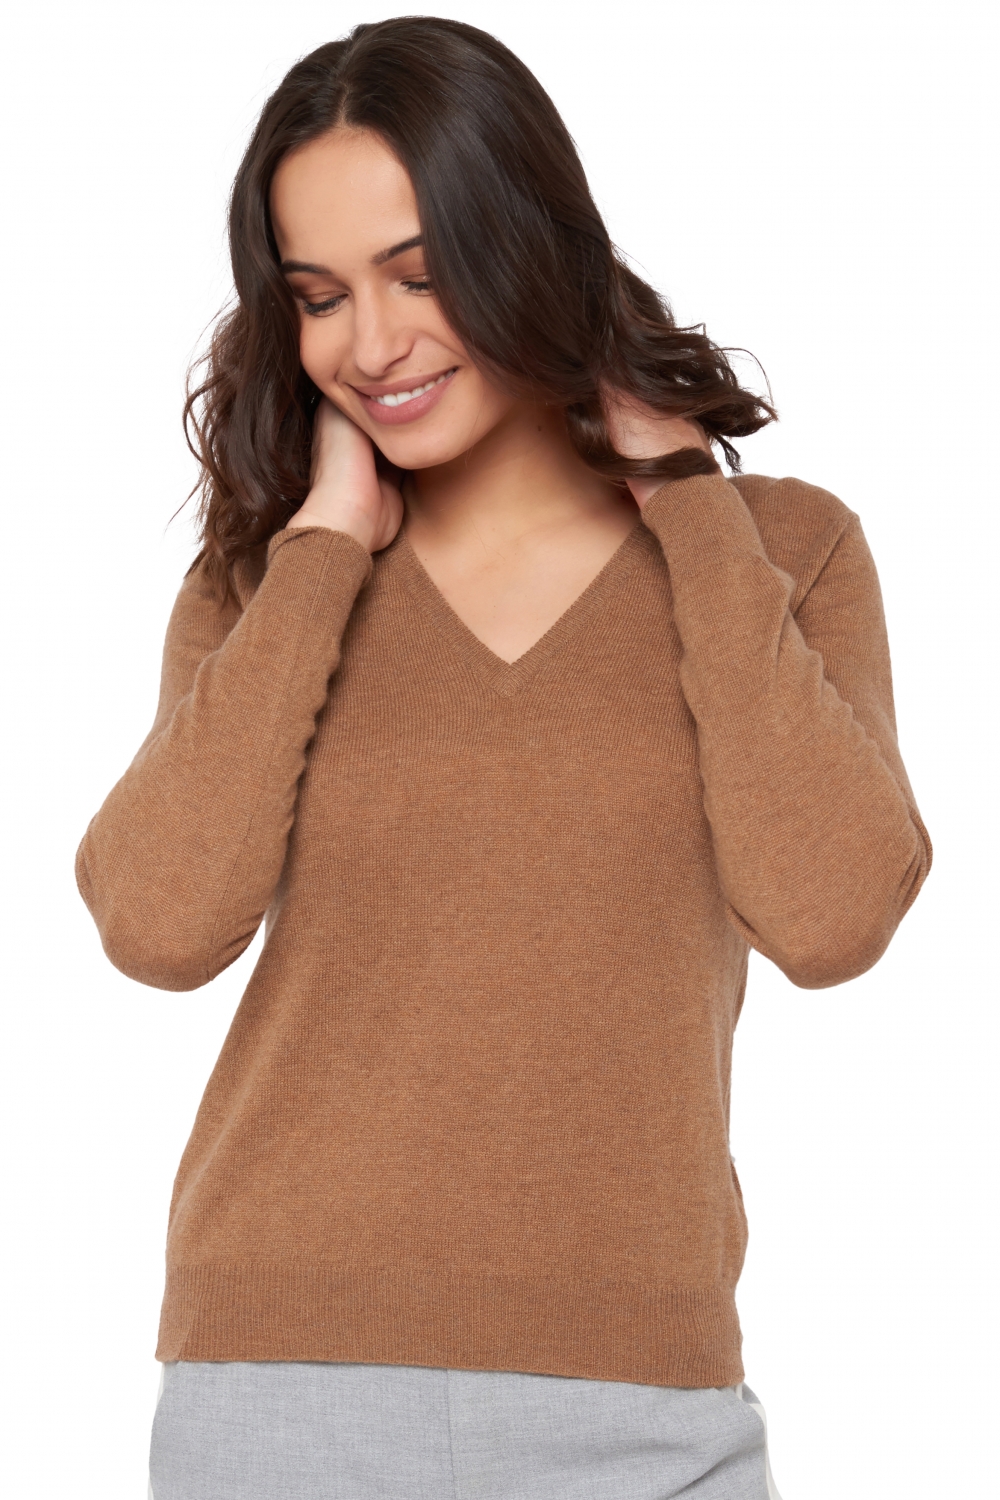 Cachemire pull femme faustine camel chine xs